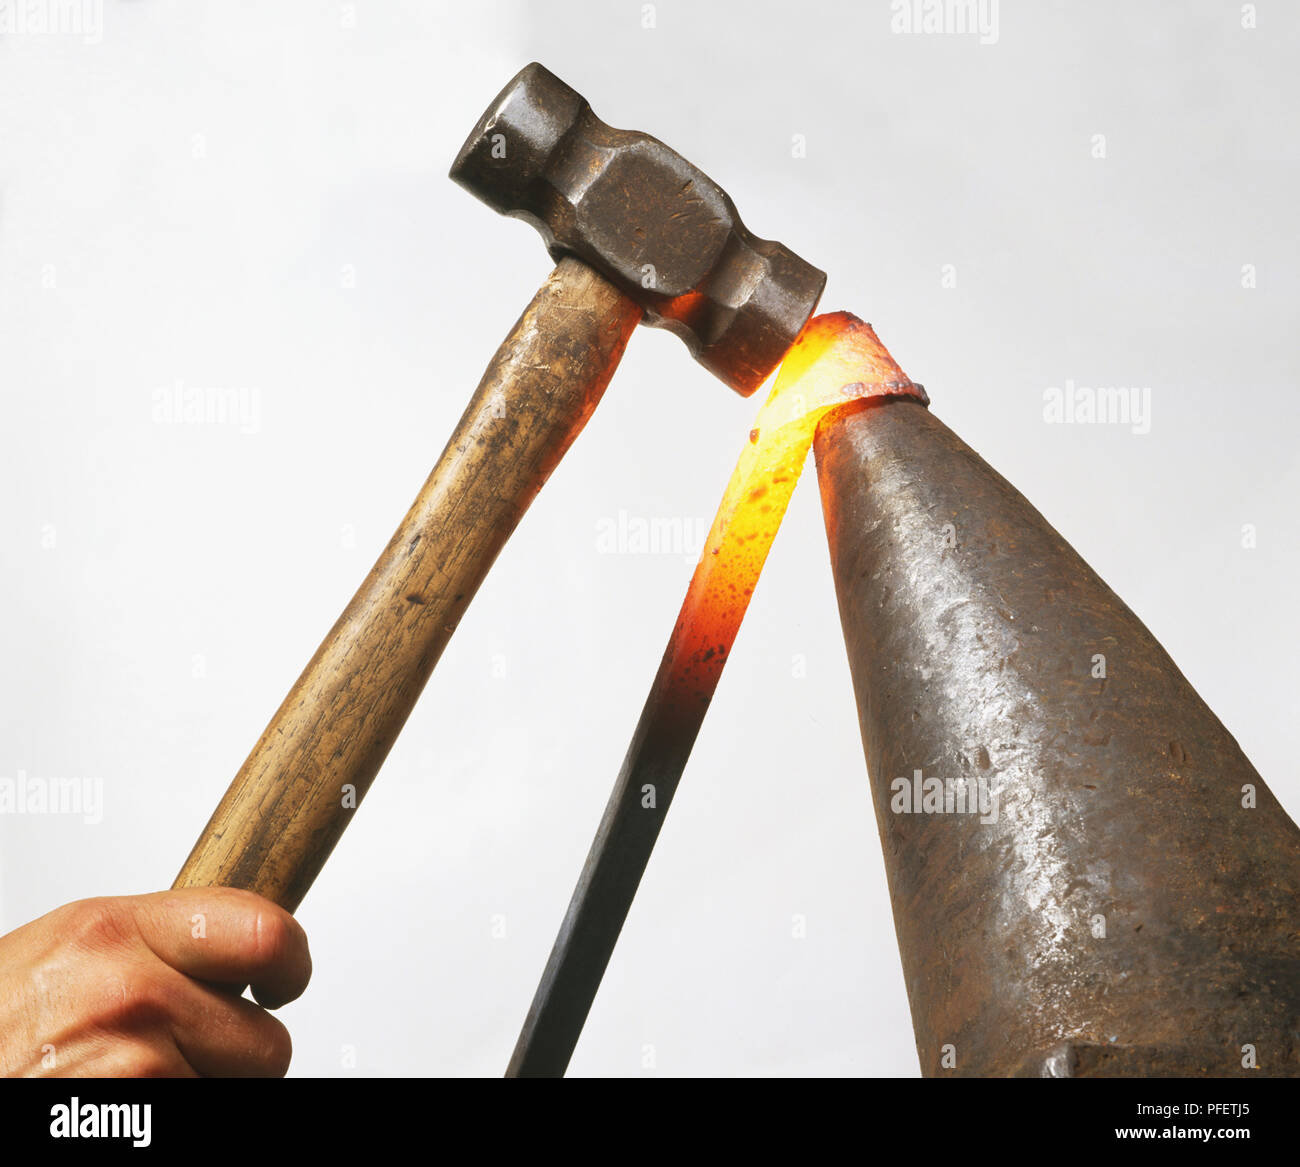 Red-hot steel bar being fashioned with a hammer, side view. Stock Photo